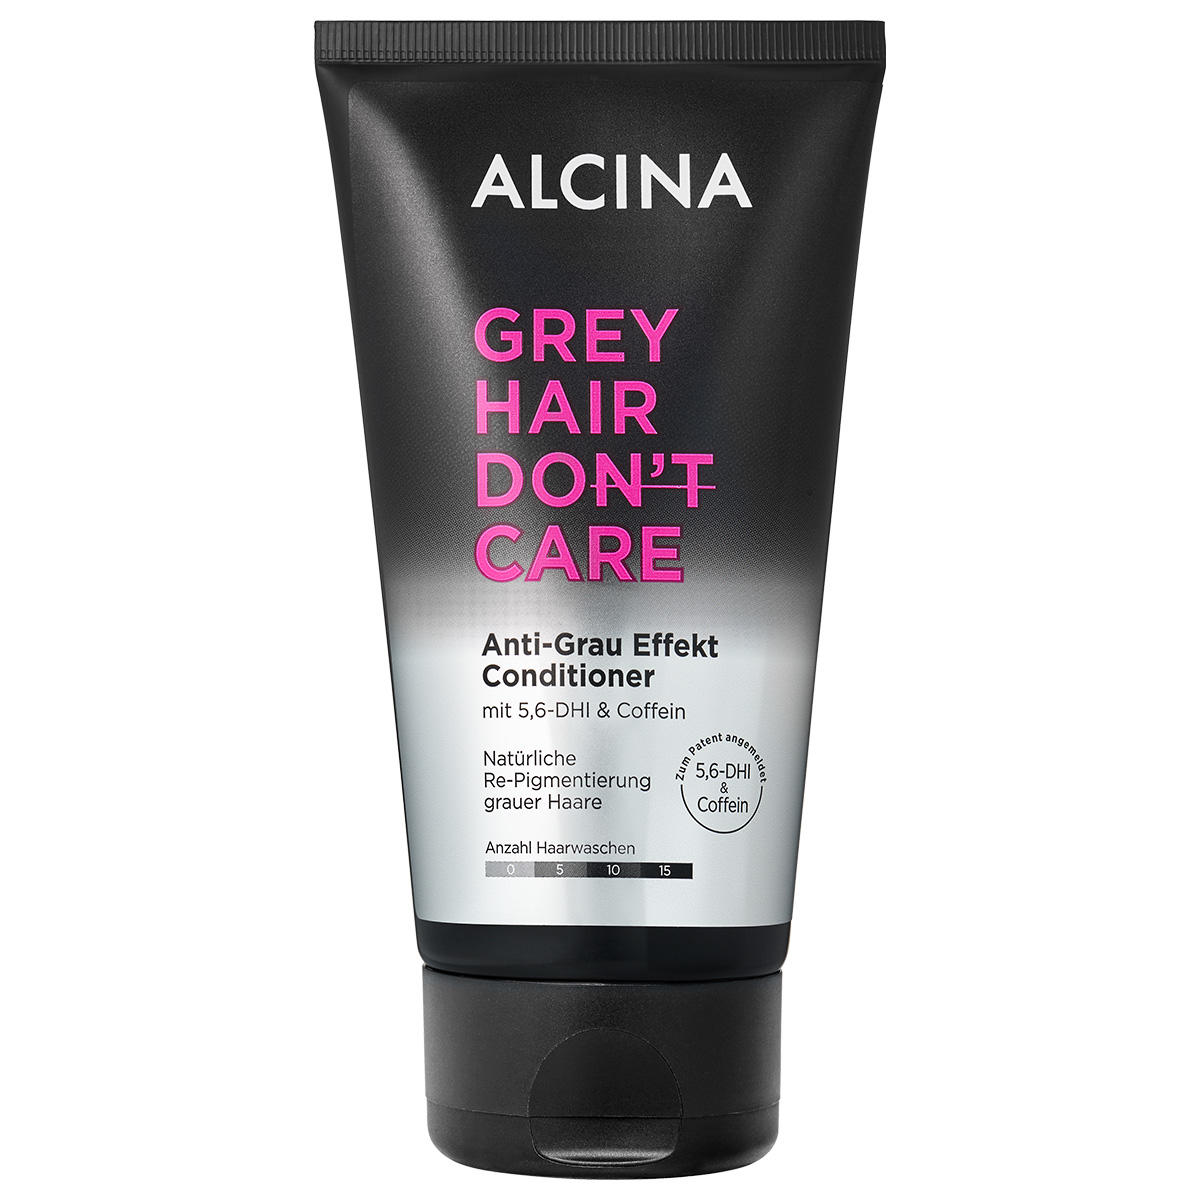 Alcina GREY HAIR DON’T CARE Après-shampooing effet anti-grisaille 150 ml - 1